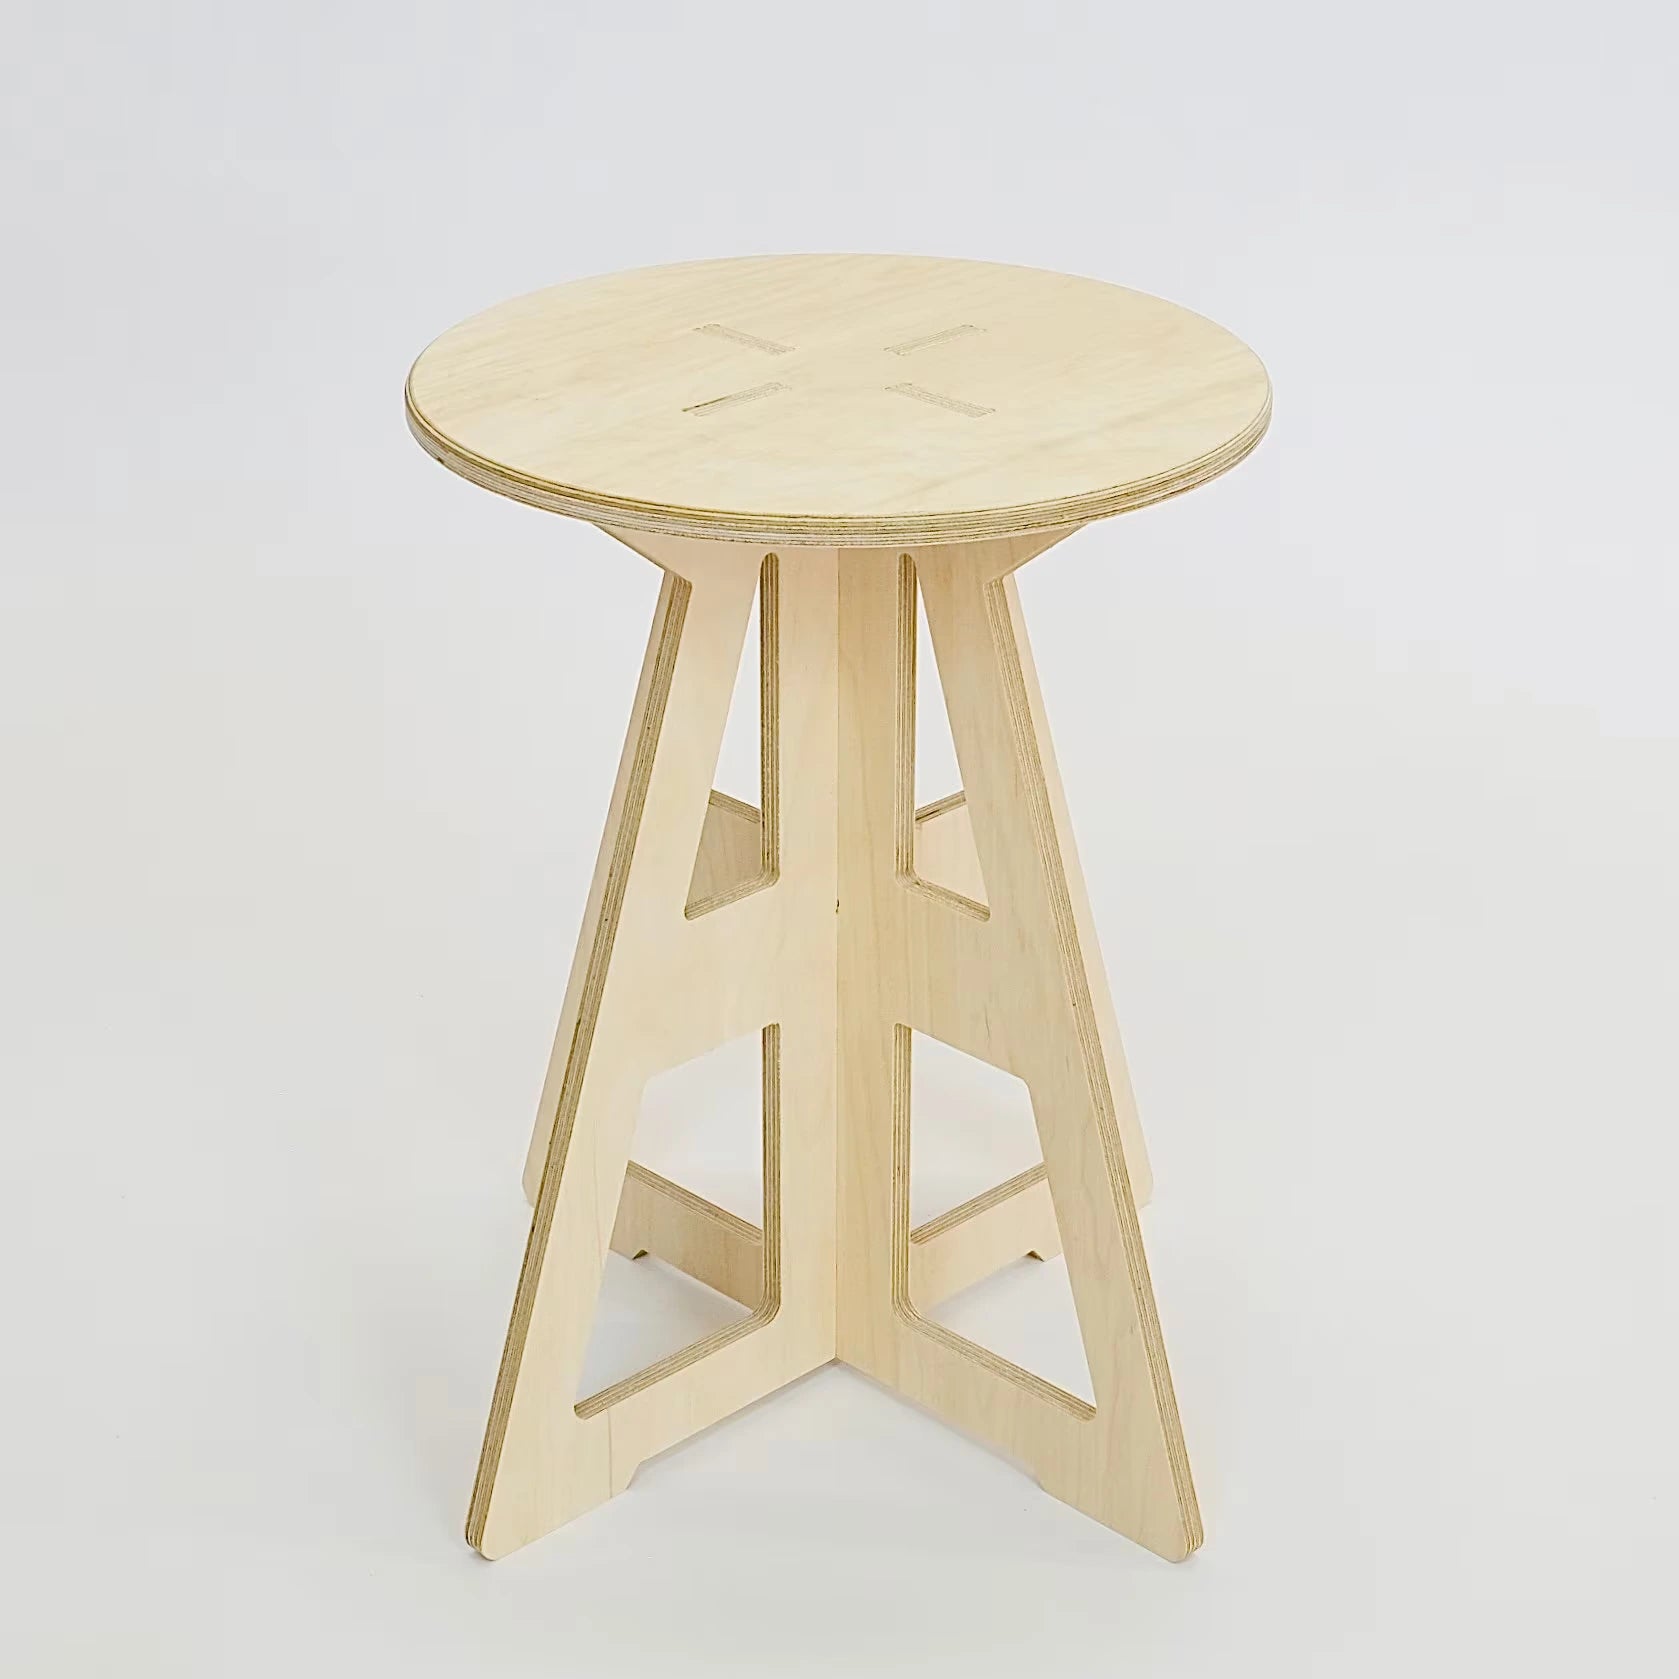 A simple modern pale wooden small stool. It has a round top and triangle legs which are slotted together in a cross shape, the base is wider than the top. The top also features four grooves where the legs slot into the top.